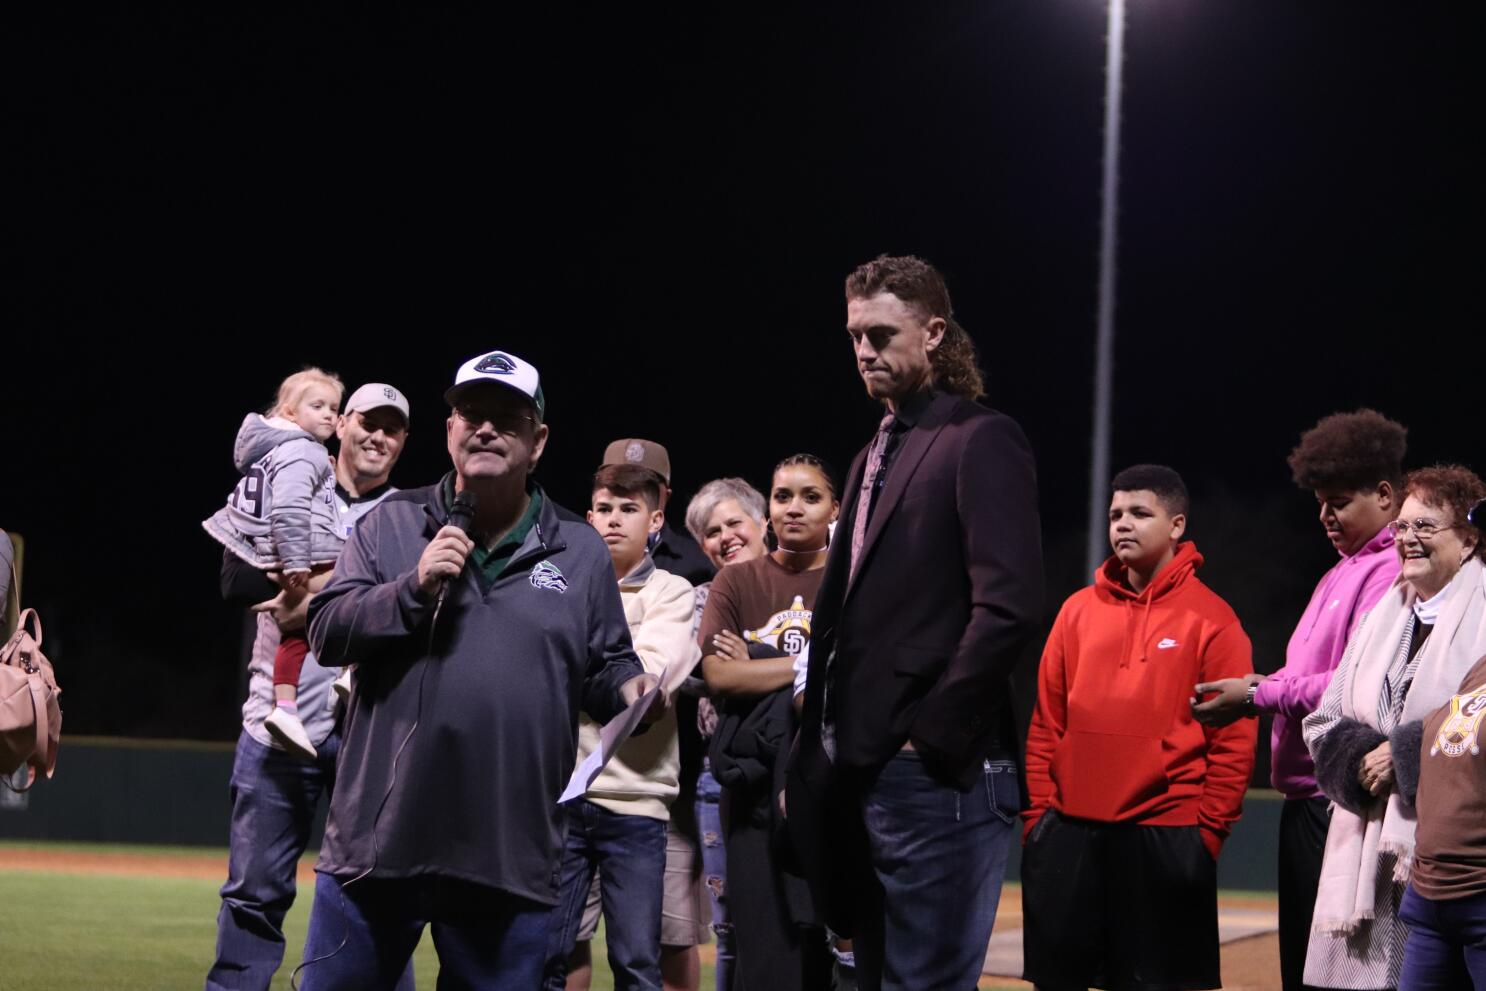 Chris Paddack Jersey Retirement at Cedar Park HS  San Diego Padres pitcher Chris  Paddack returned to his alma mater for his jersey retirement last Friday.  What a special night at Cedar